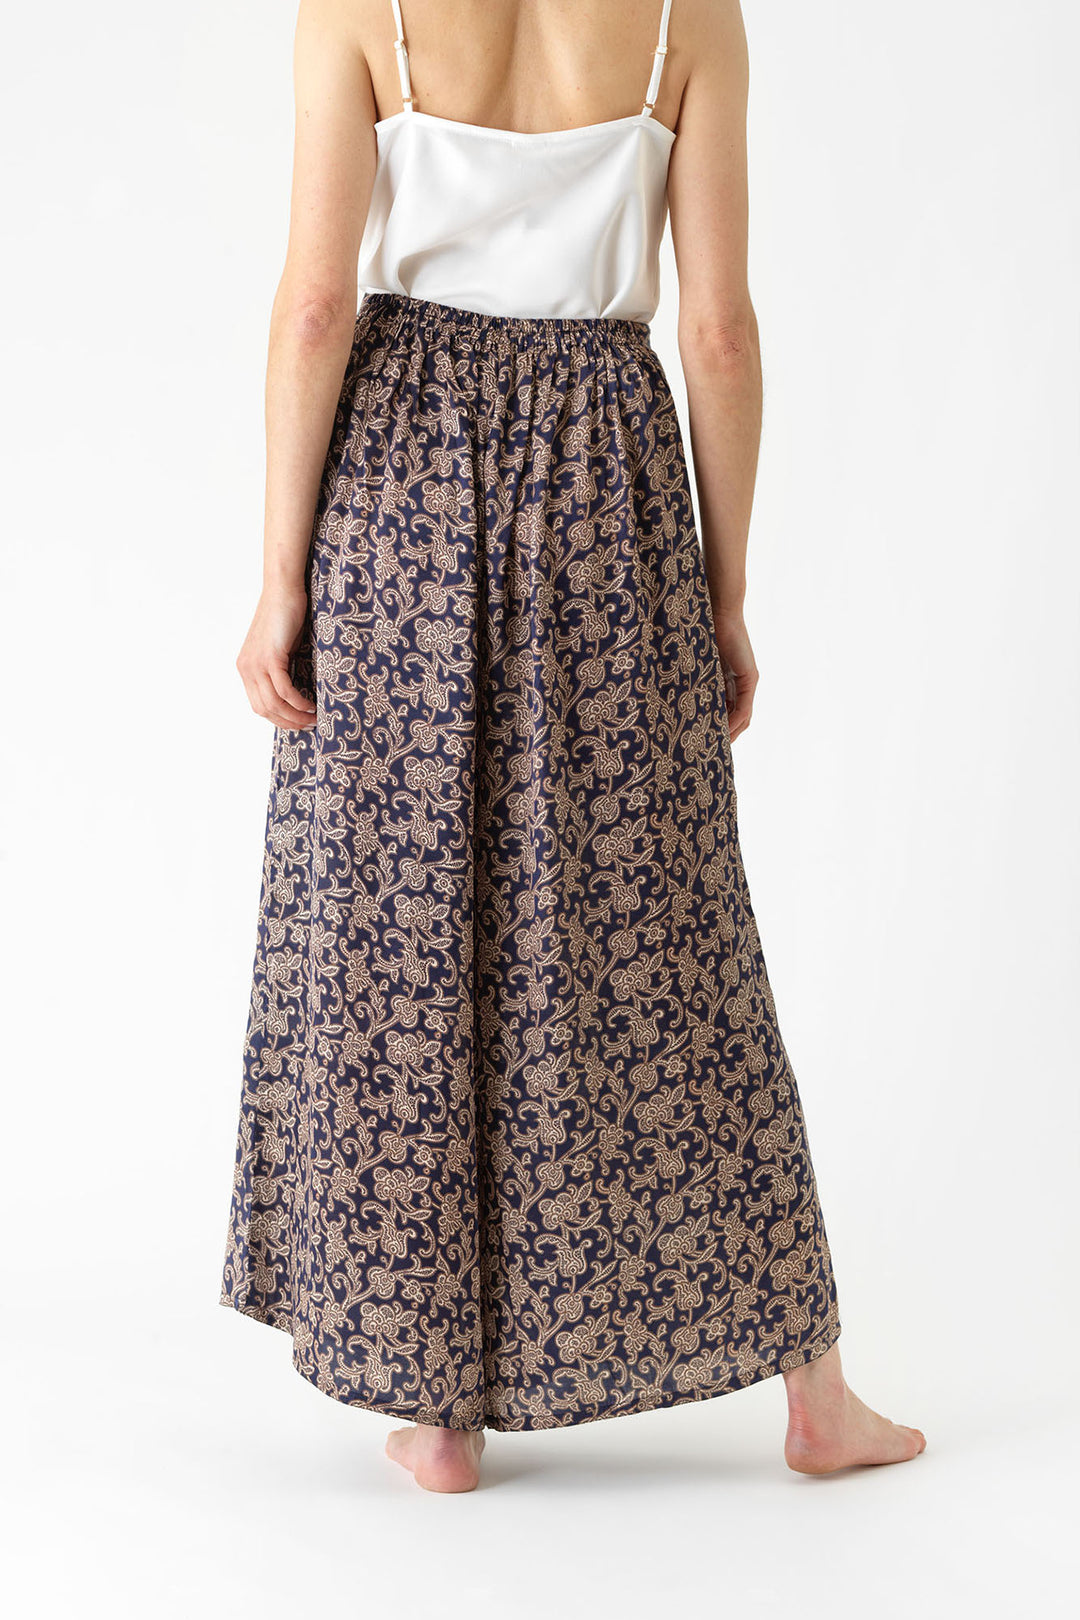 ladies palazzo pants in blue paisley print by One Hundred Stars